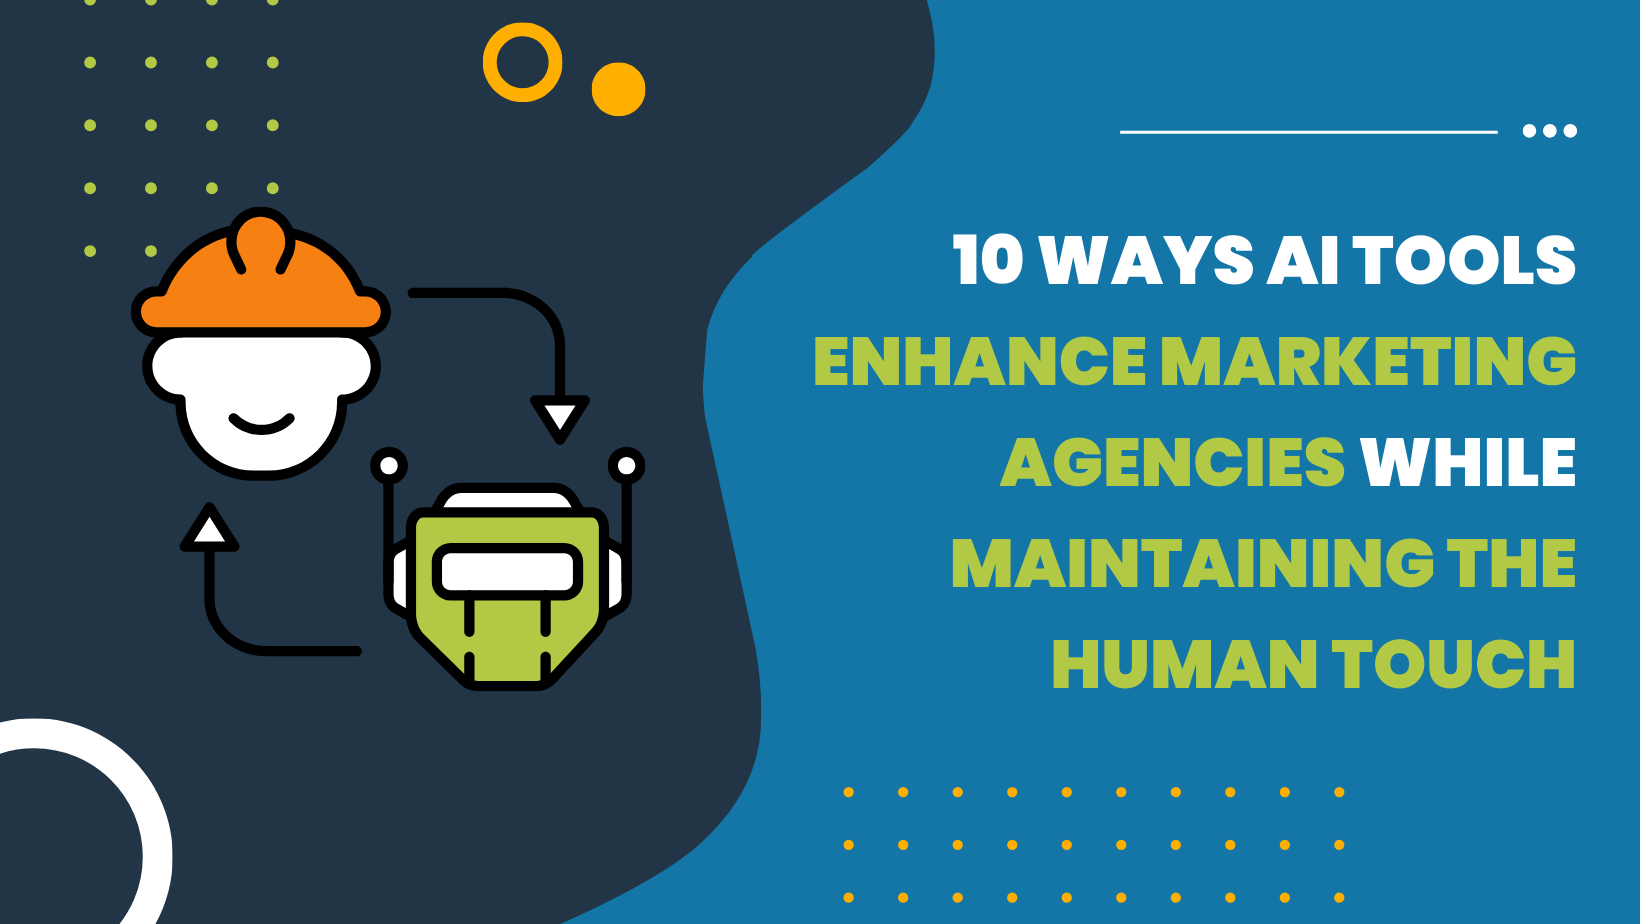 10 Ways AI Tools Enhance Marketing Agencies While Maintaining the Human Touch graphic